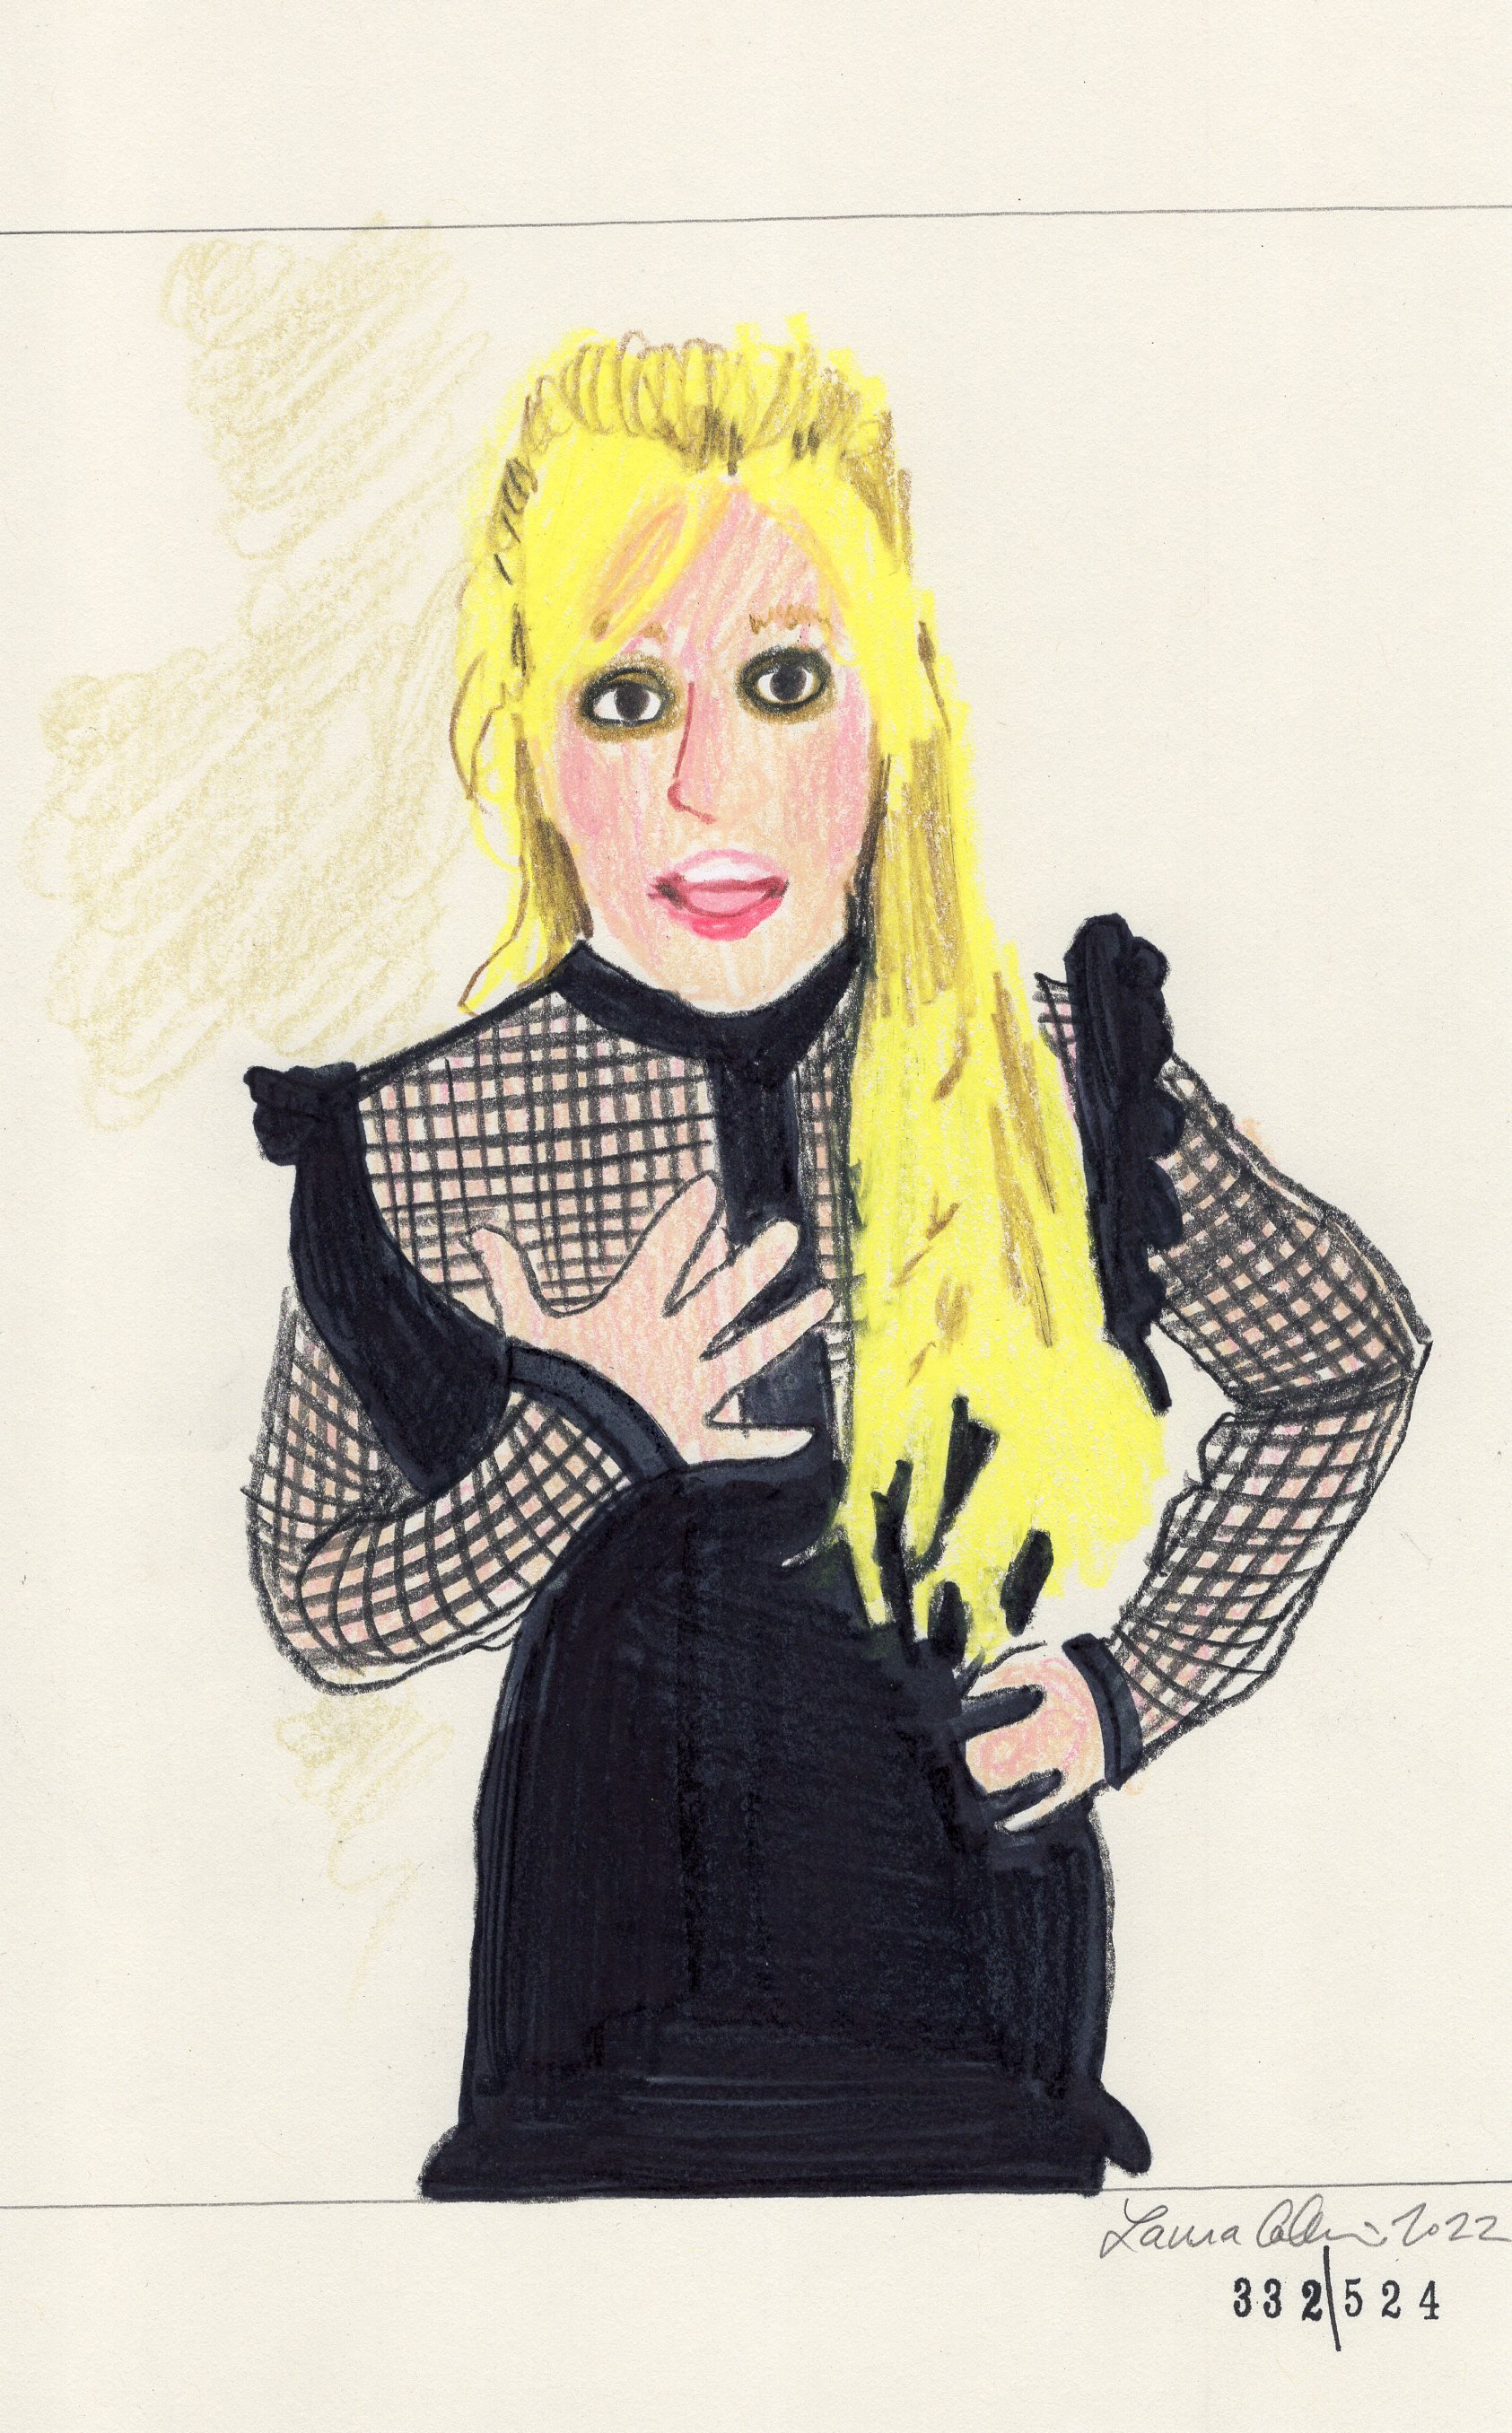 Laura Collins Britney Spears Animation 6x9in mixed media 2022 no332.jpg